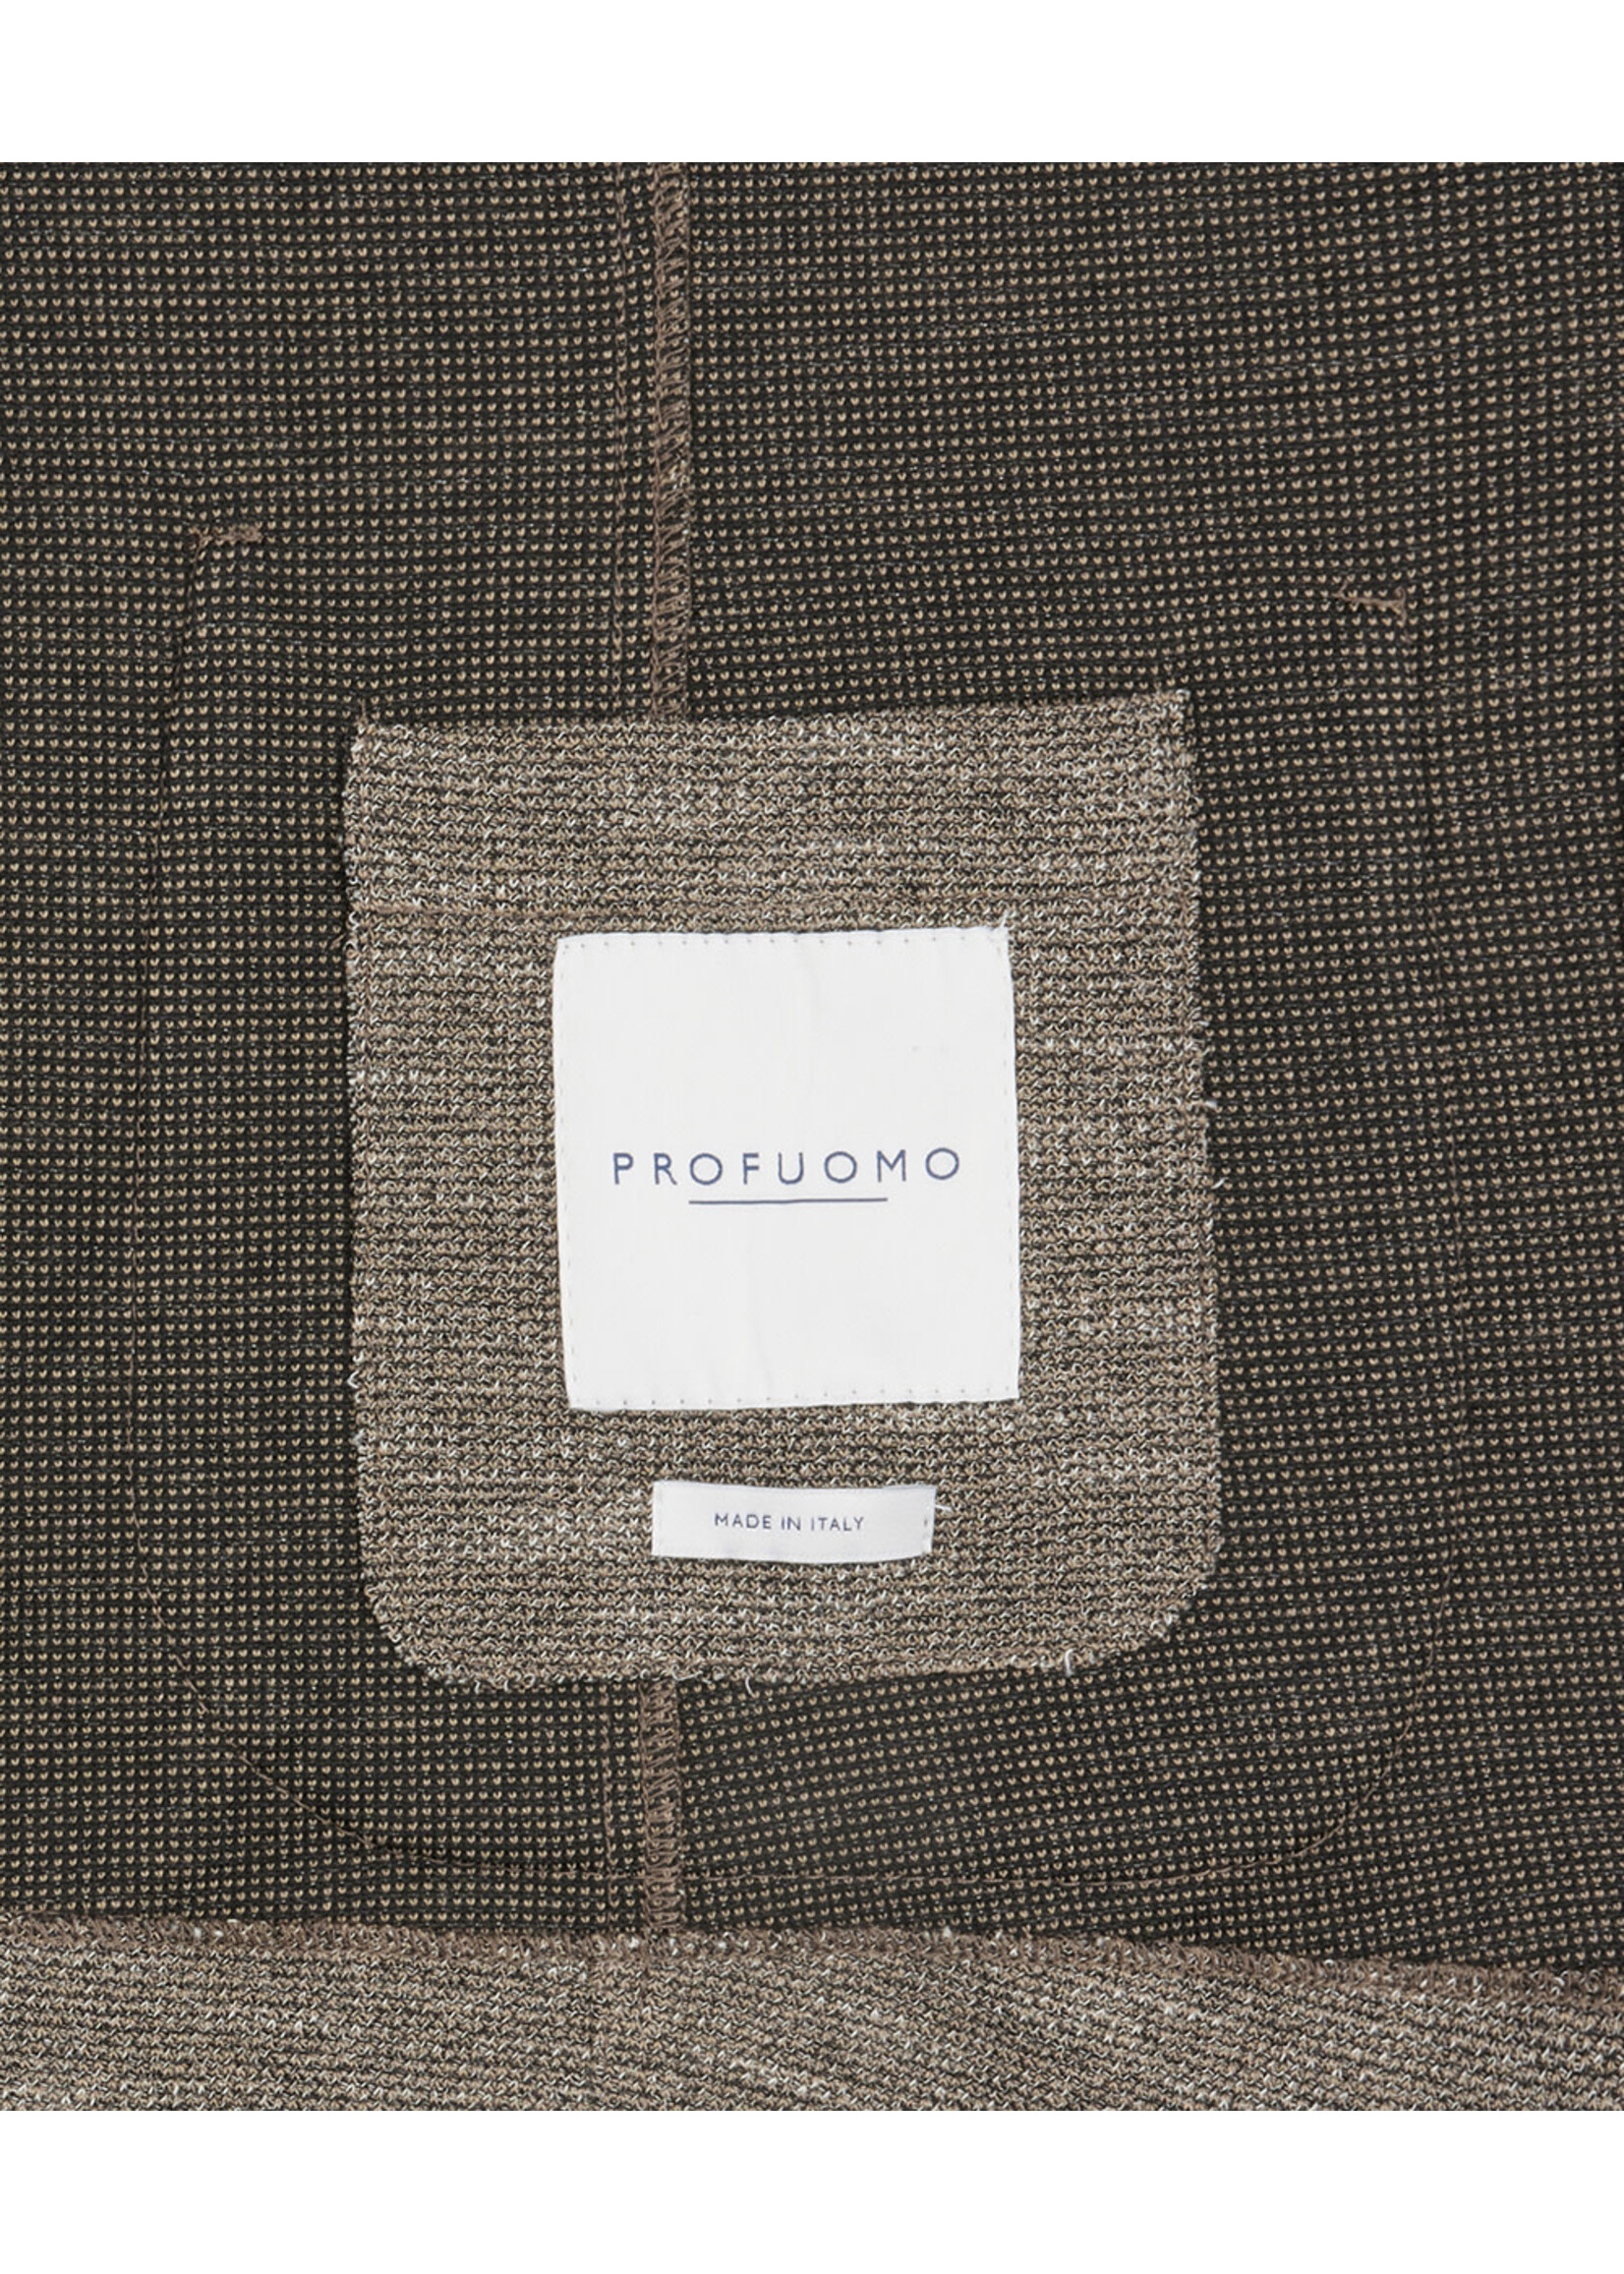 Profuomo Jacked knitted